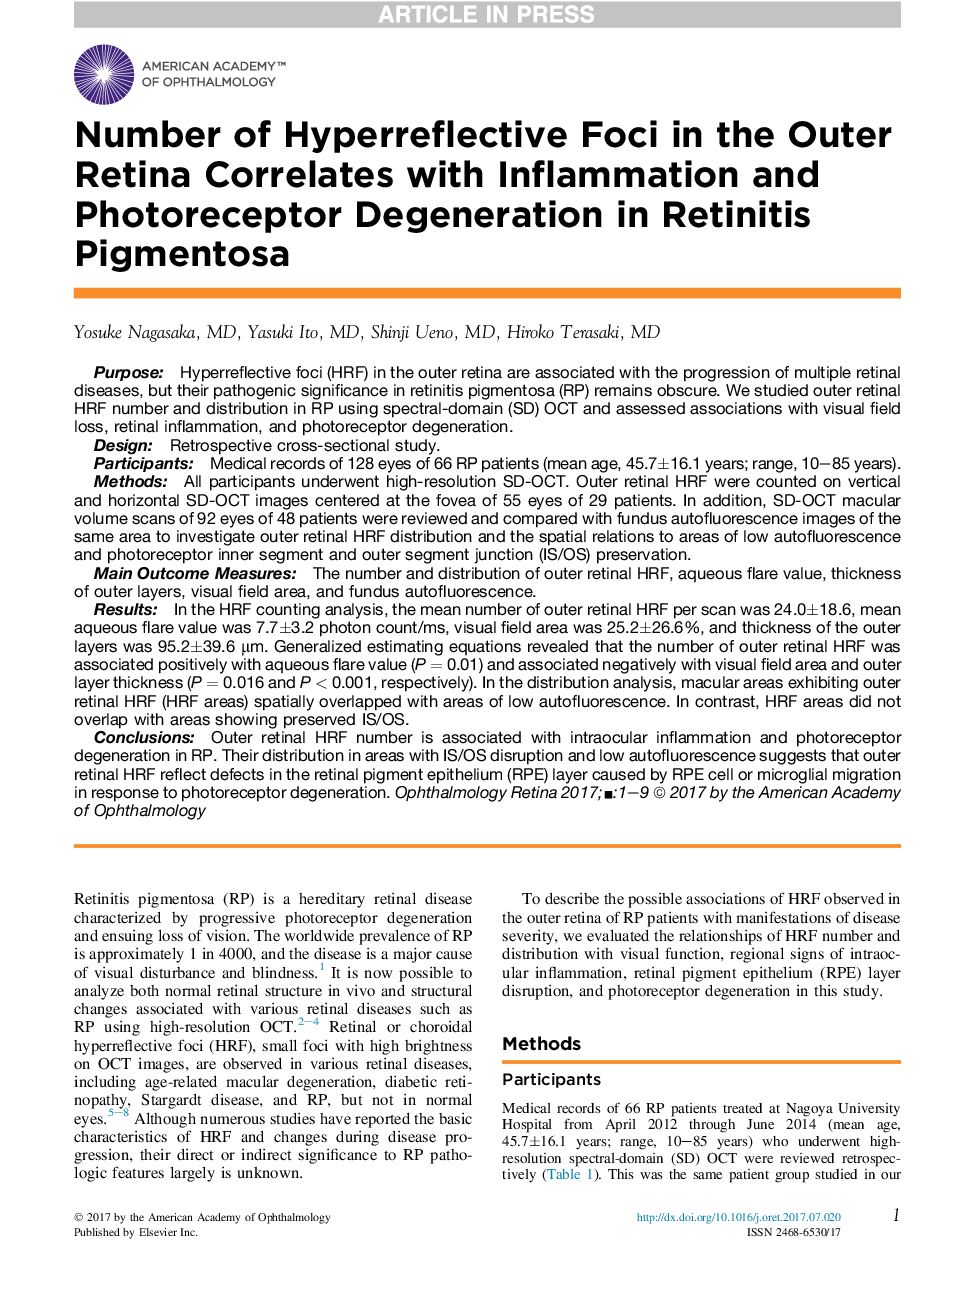 Number of Hyperreflective Foci in the Outer Retina Correlates with Inflammation and Photoreceptor Degeneration in Retinitis Pigmentosa